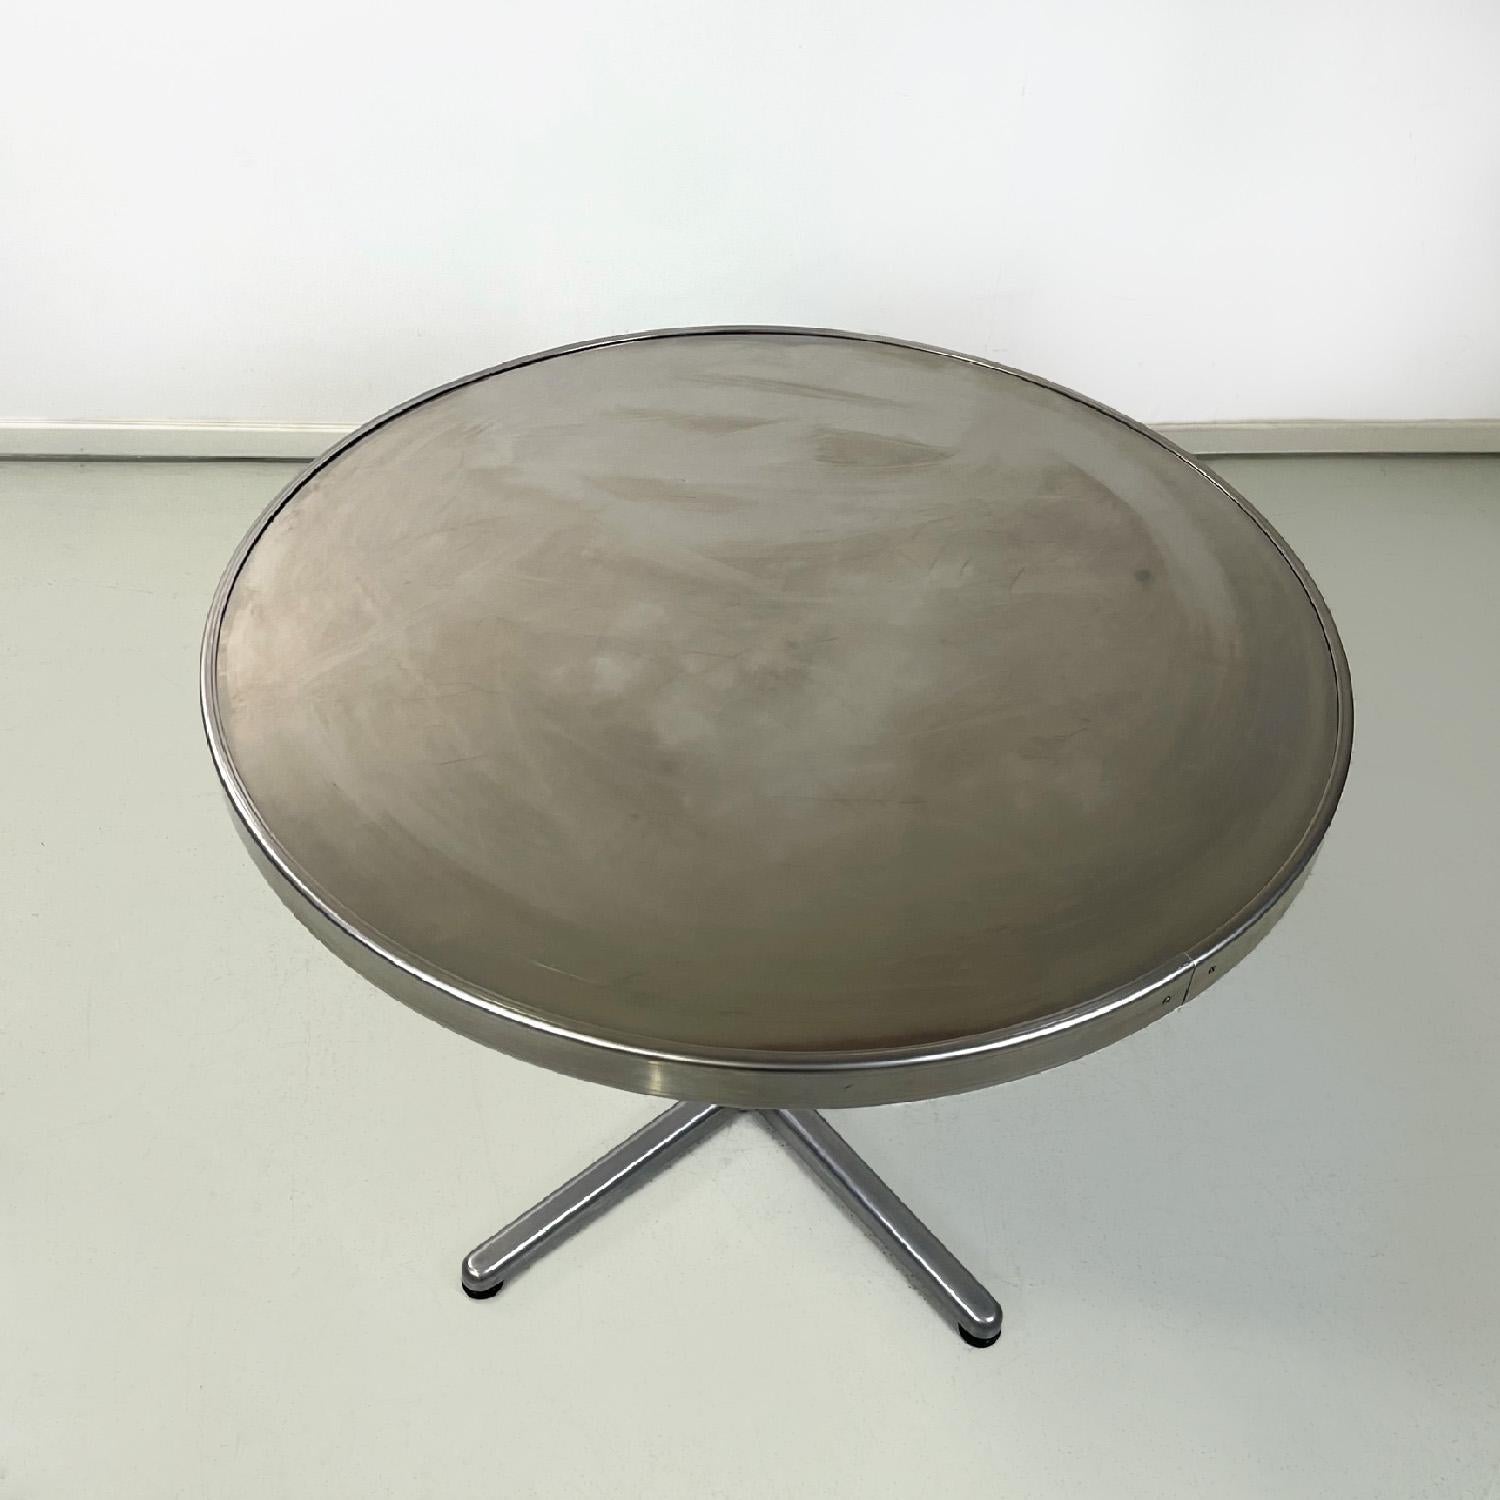 Space Age Italian modern round steel dining table, 1970s For Sale